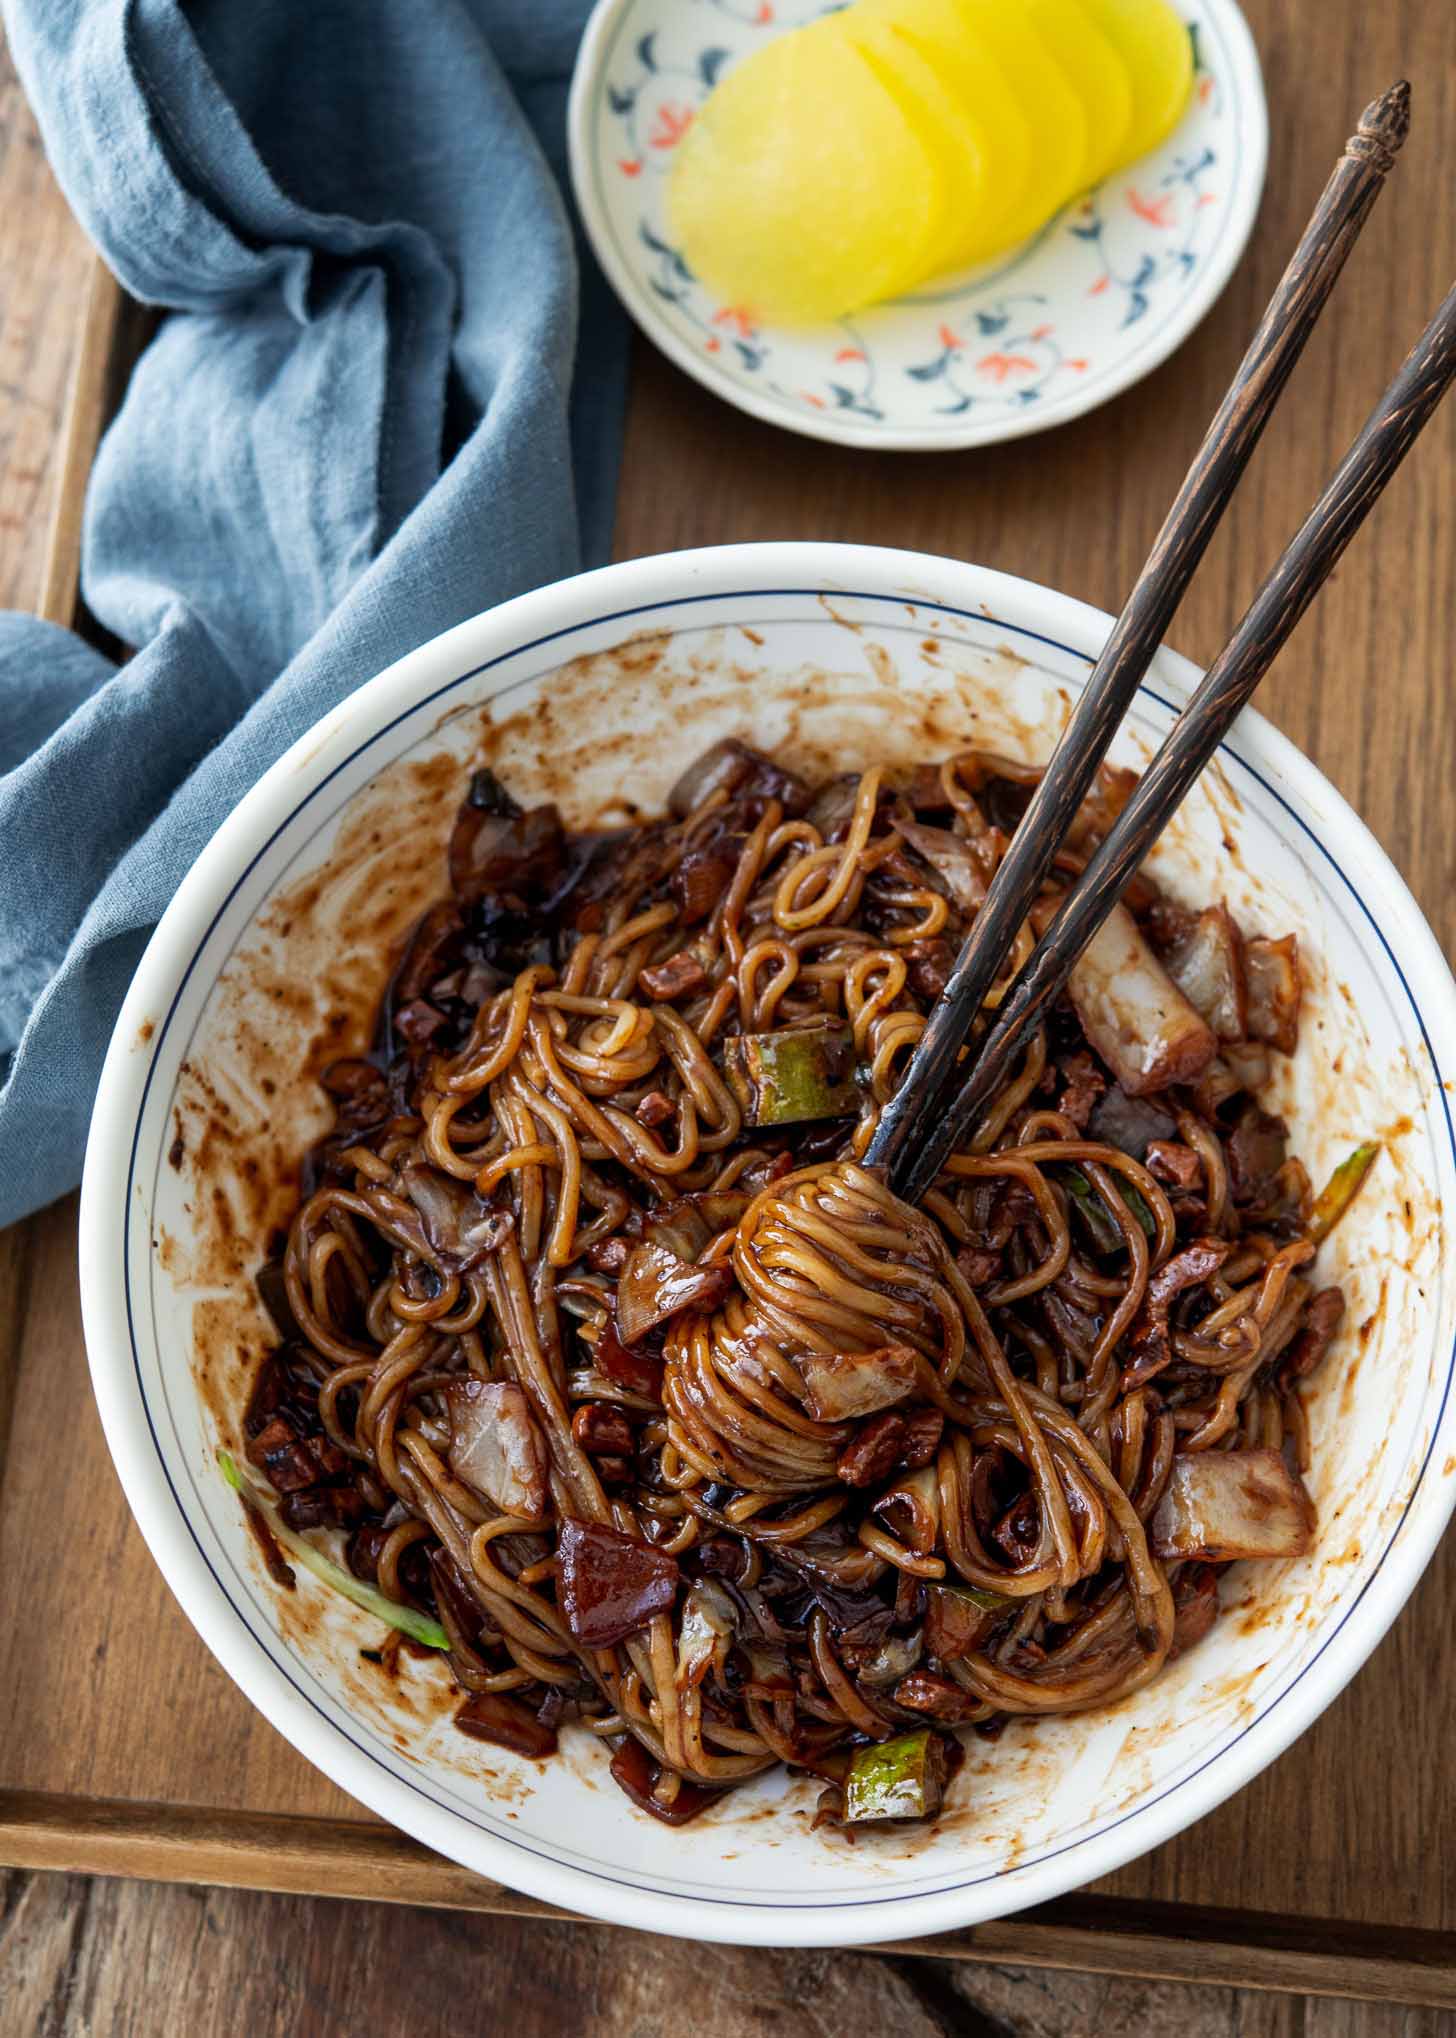 A pair of chopsticks is twirling black bean noodles in a bowl.